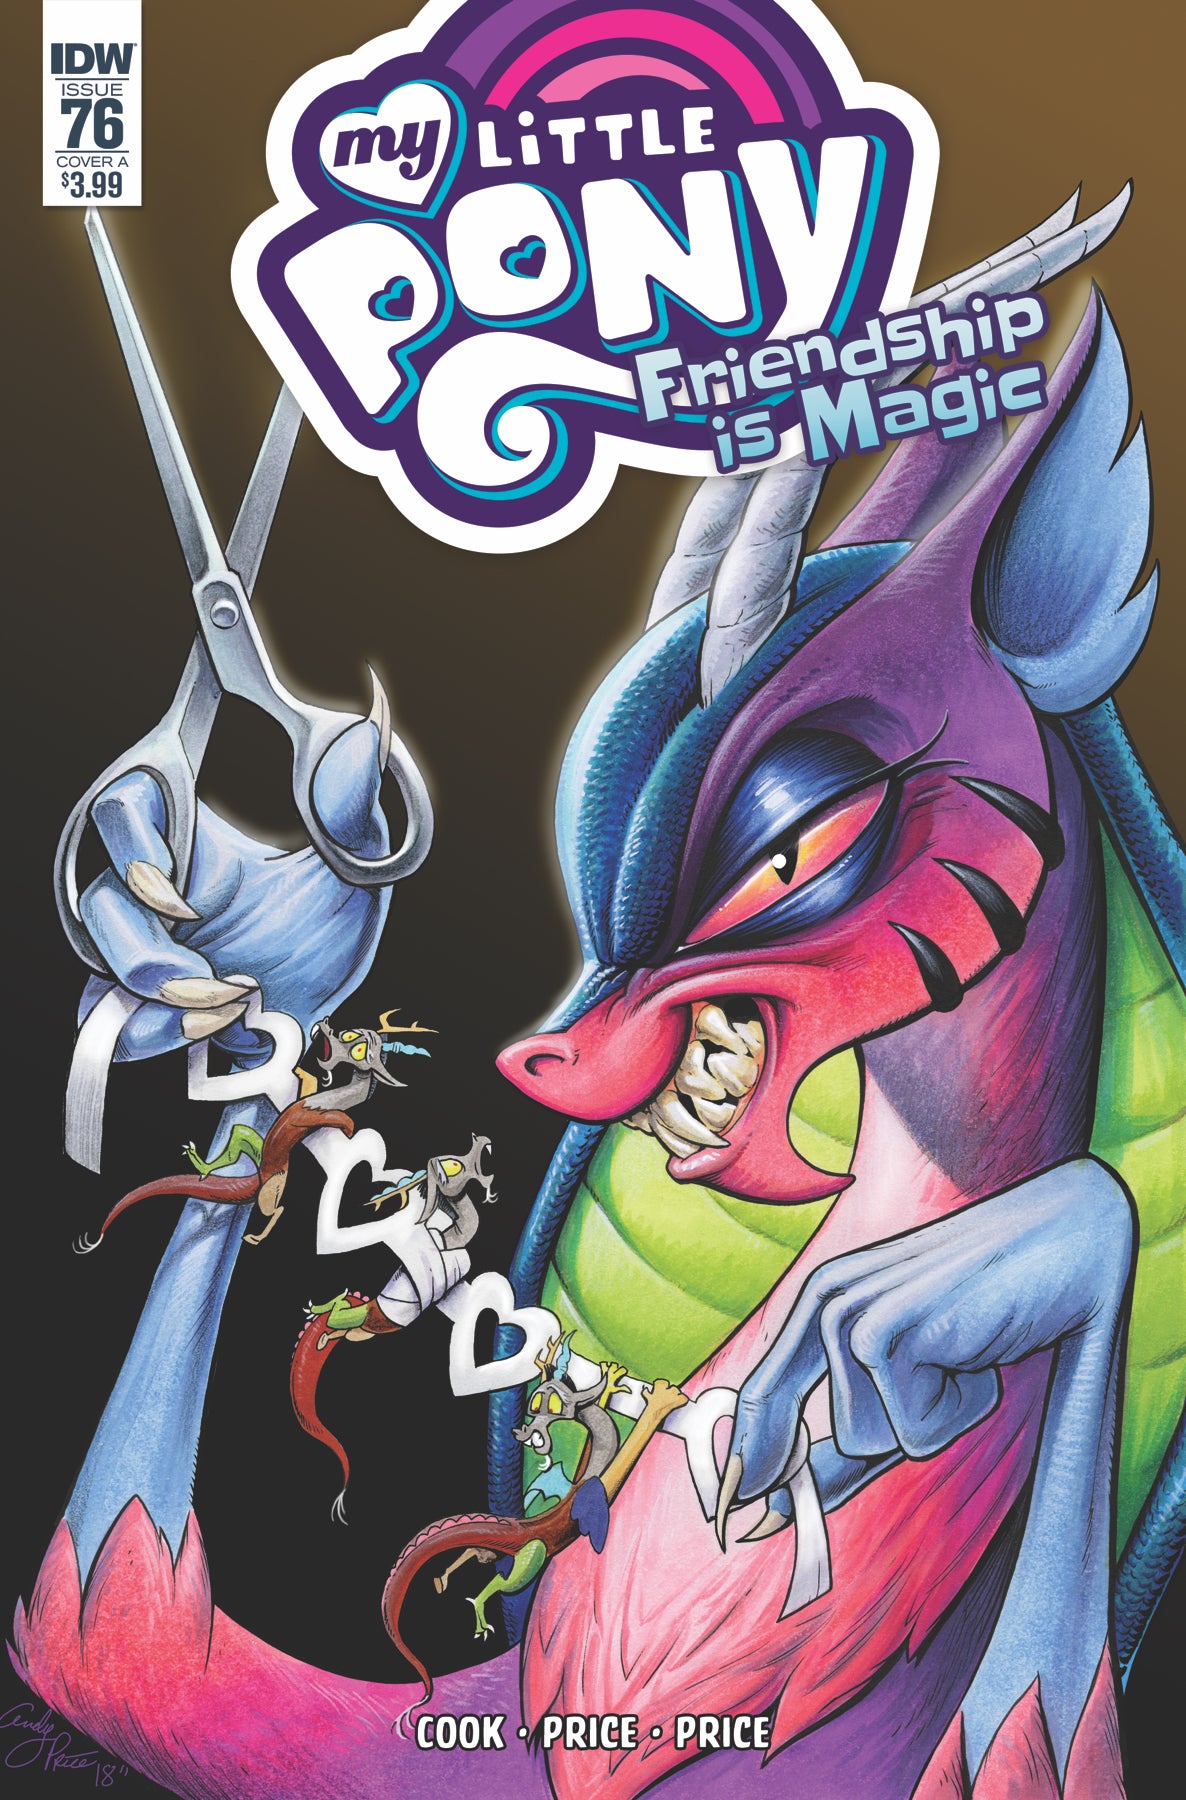 MY LITTLE PONY FRIENDSHIP IS MAGIC #76 CVR A PRICE COVER